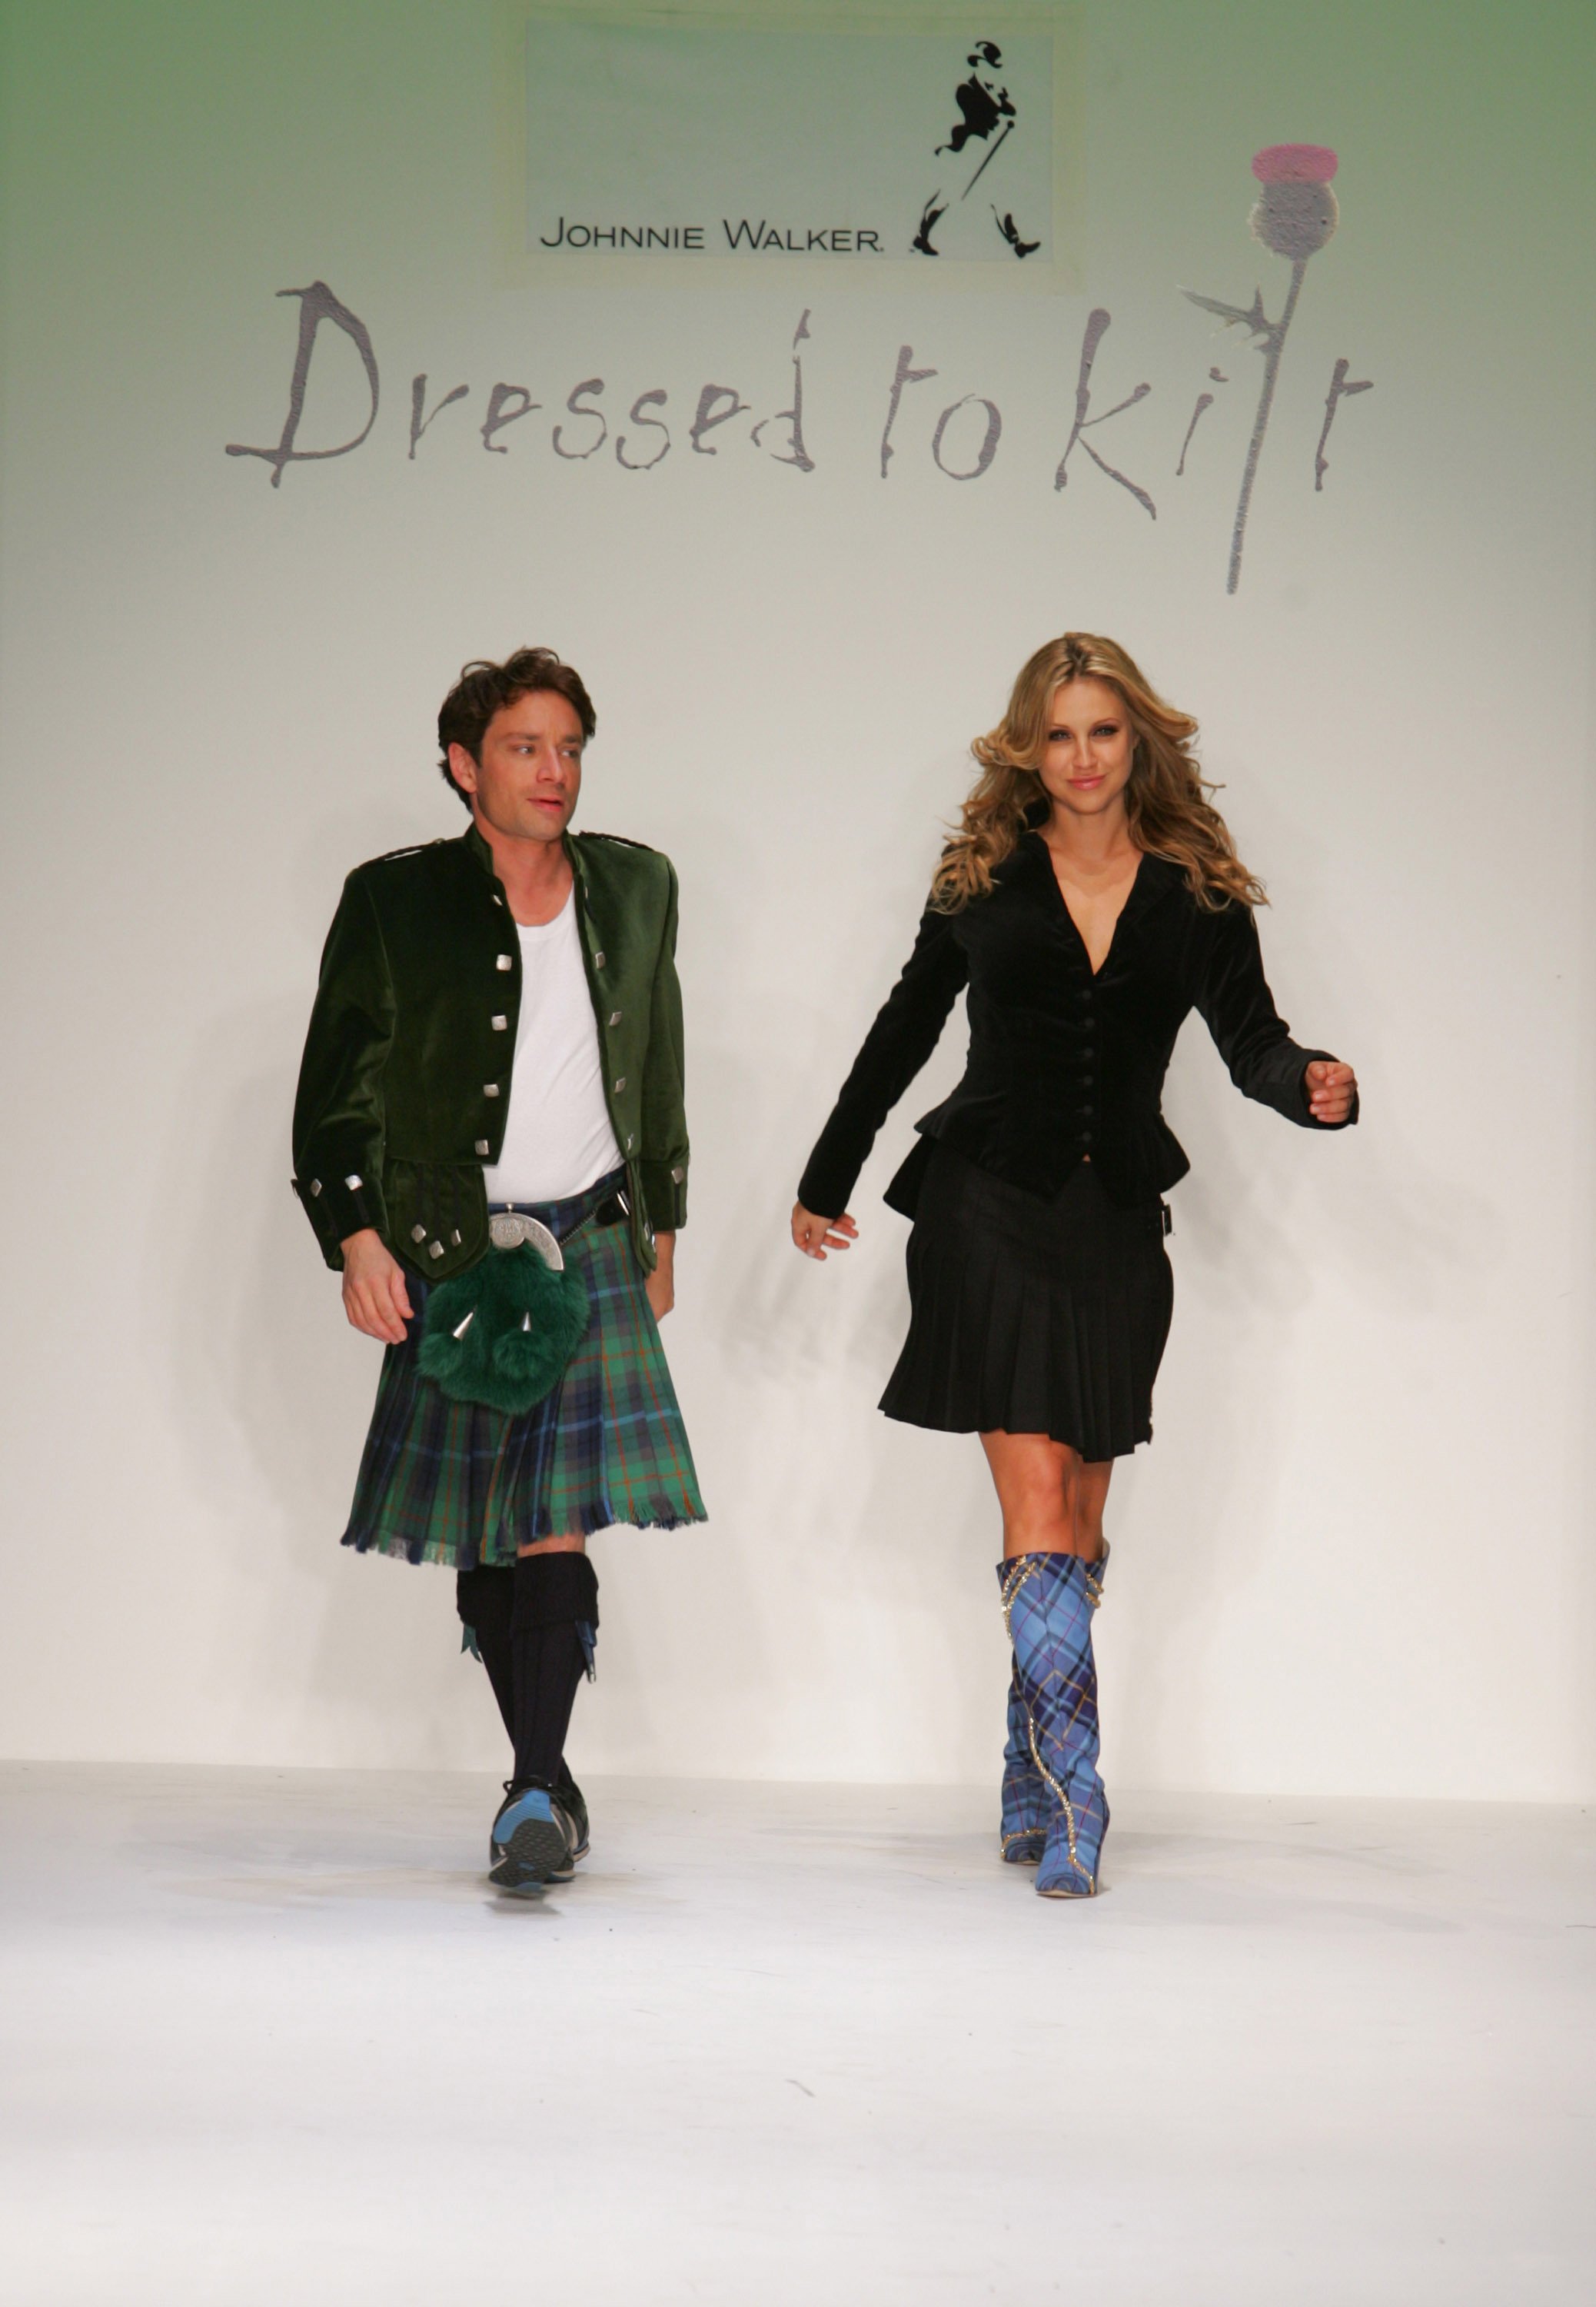 Chris Kattan and Sunshine Deia Tutt walk the runway for the Johnnie Walker presents "Dressed to Kilt" on October 14, 2006, in Los Angeles, California. | Source: Getty Images